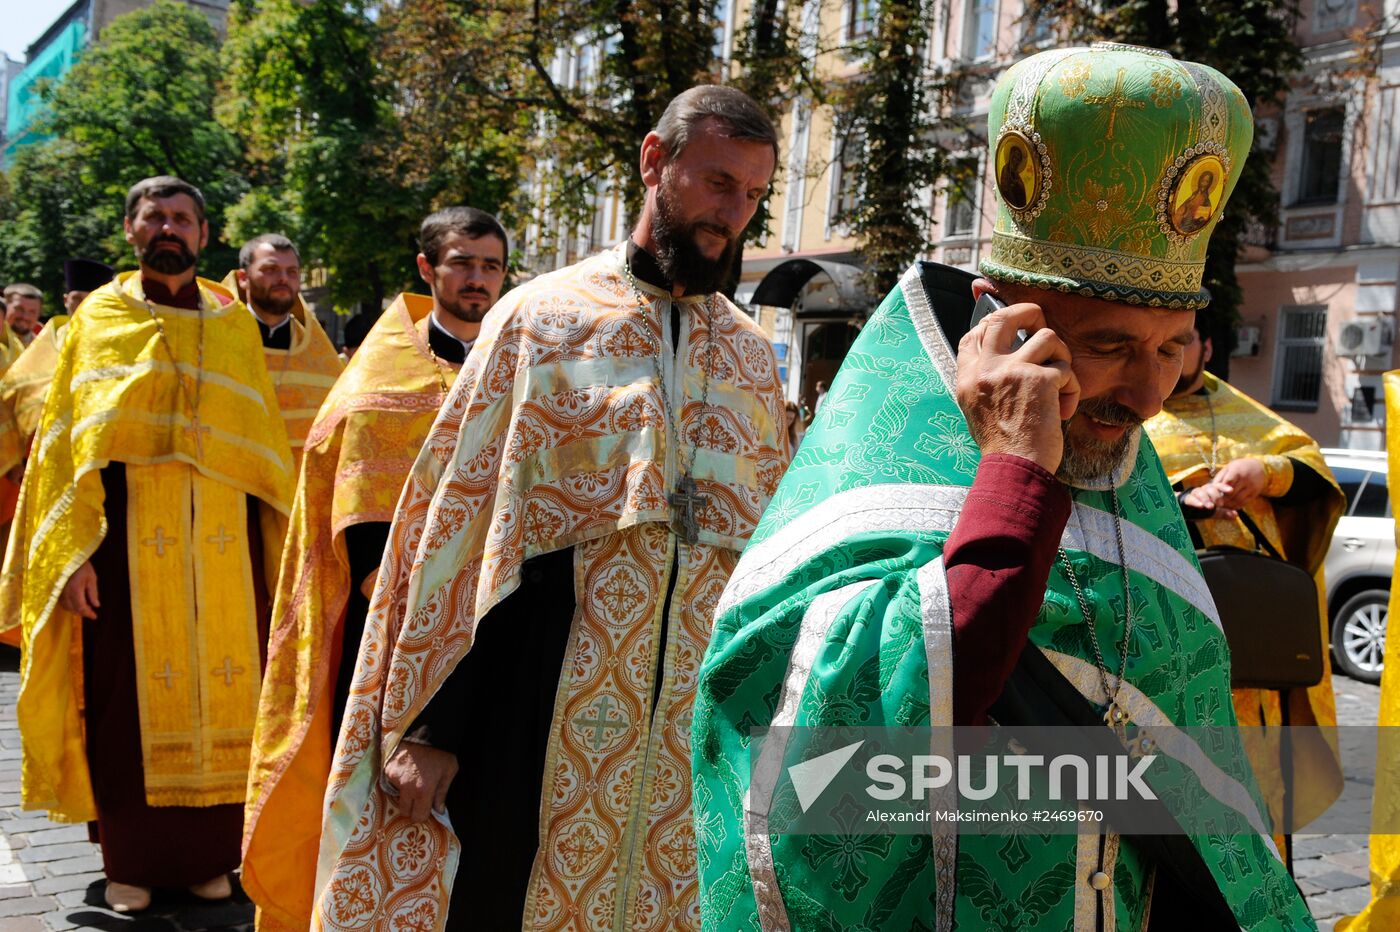 Kiev celebrates the 1026th anniversary of the Baptism of Russia